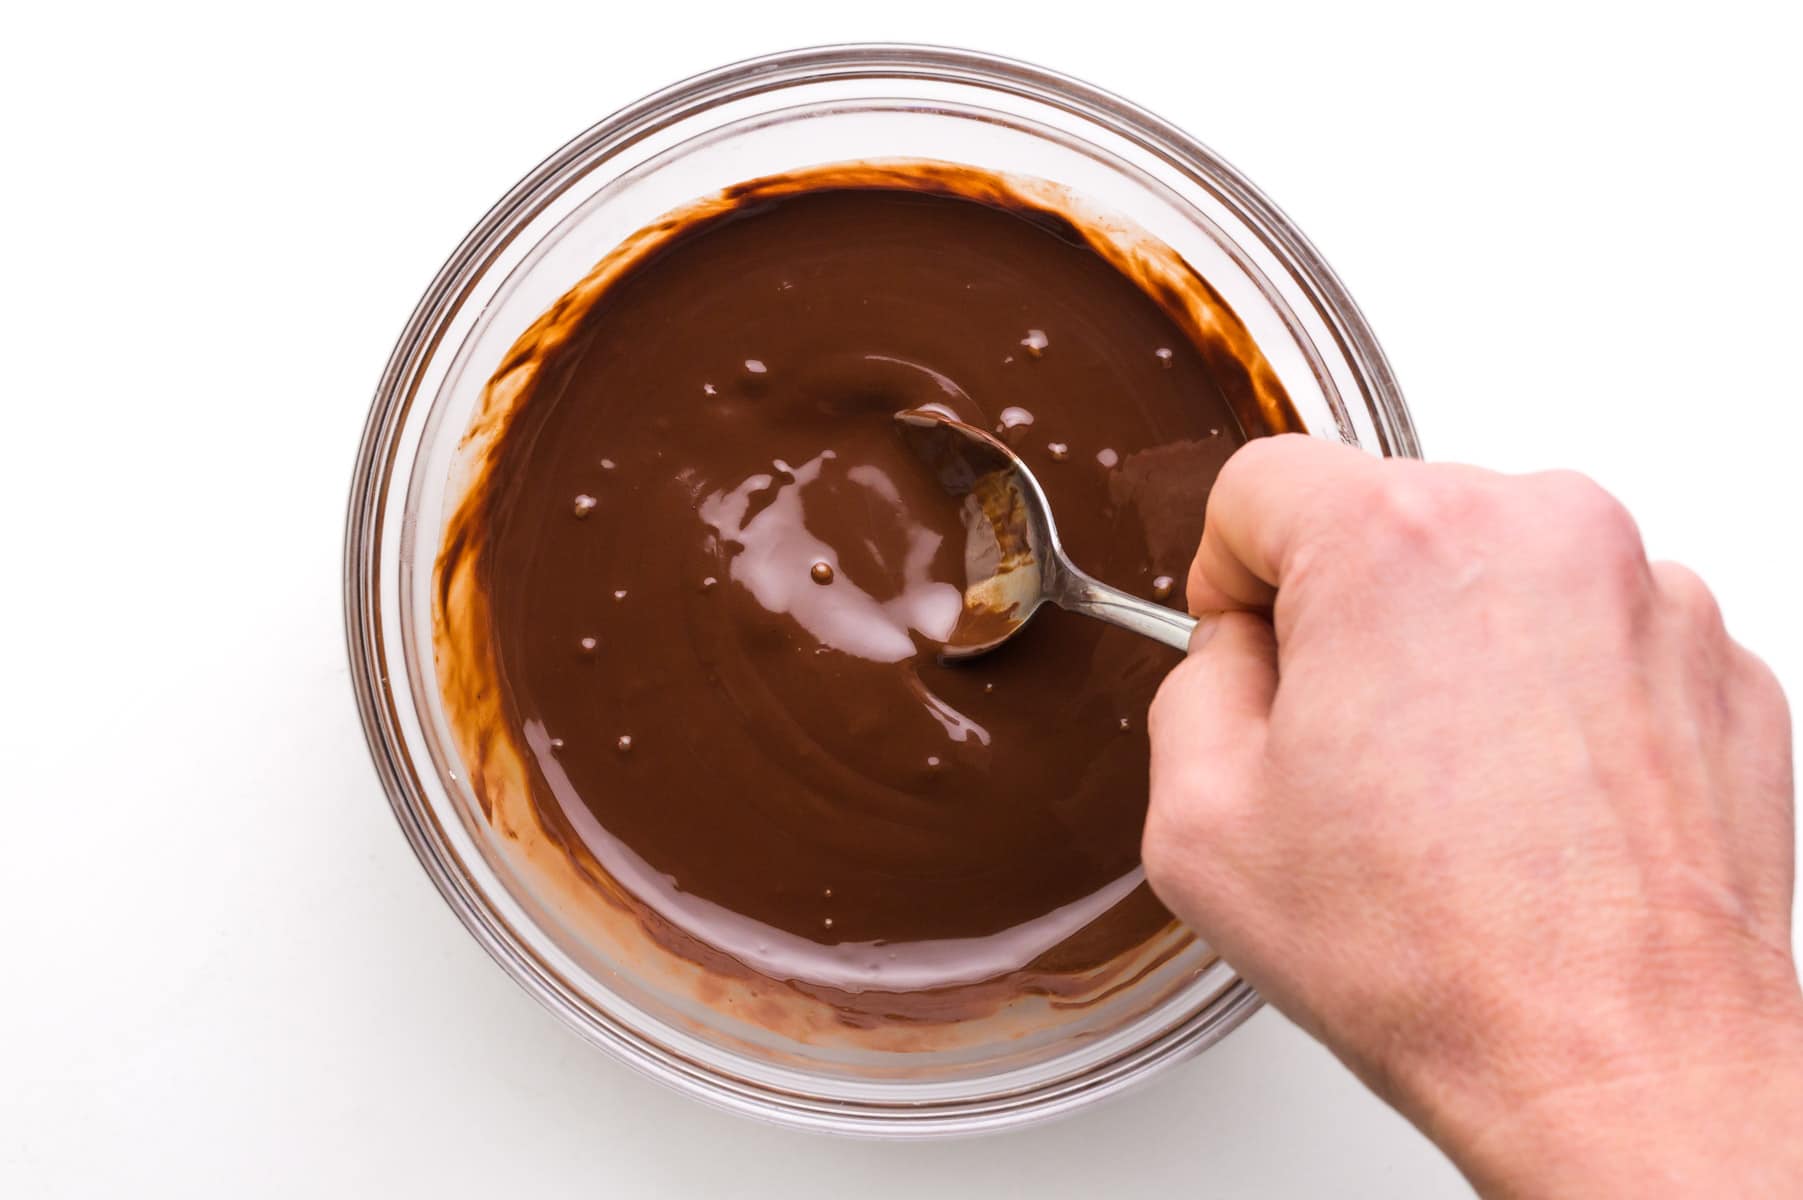 A hand holds a spoon stirring melted chocolate in a bowl.